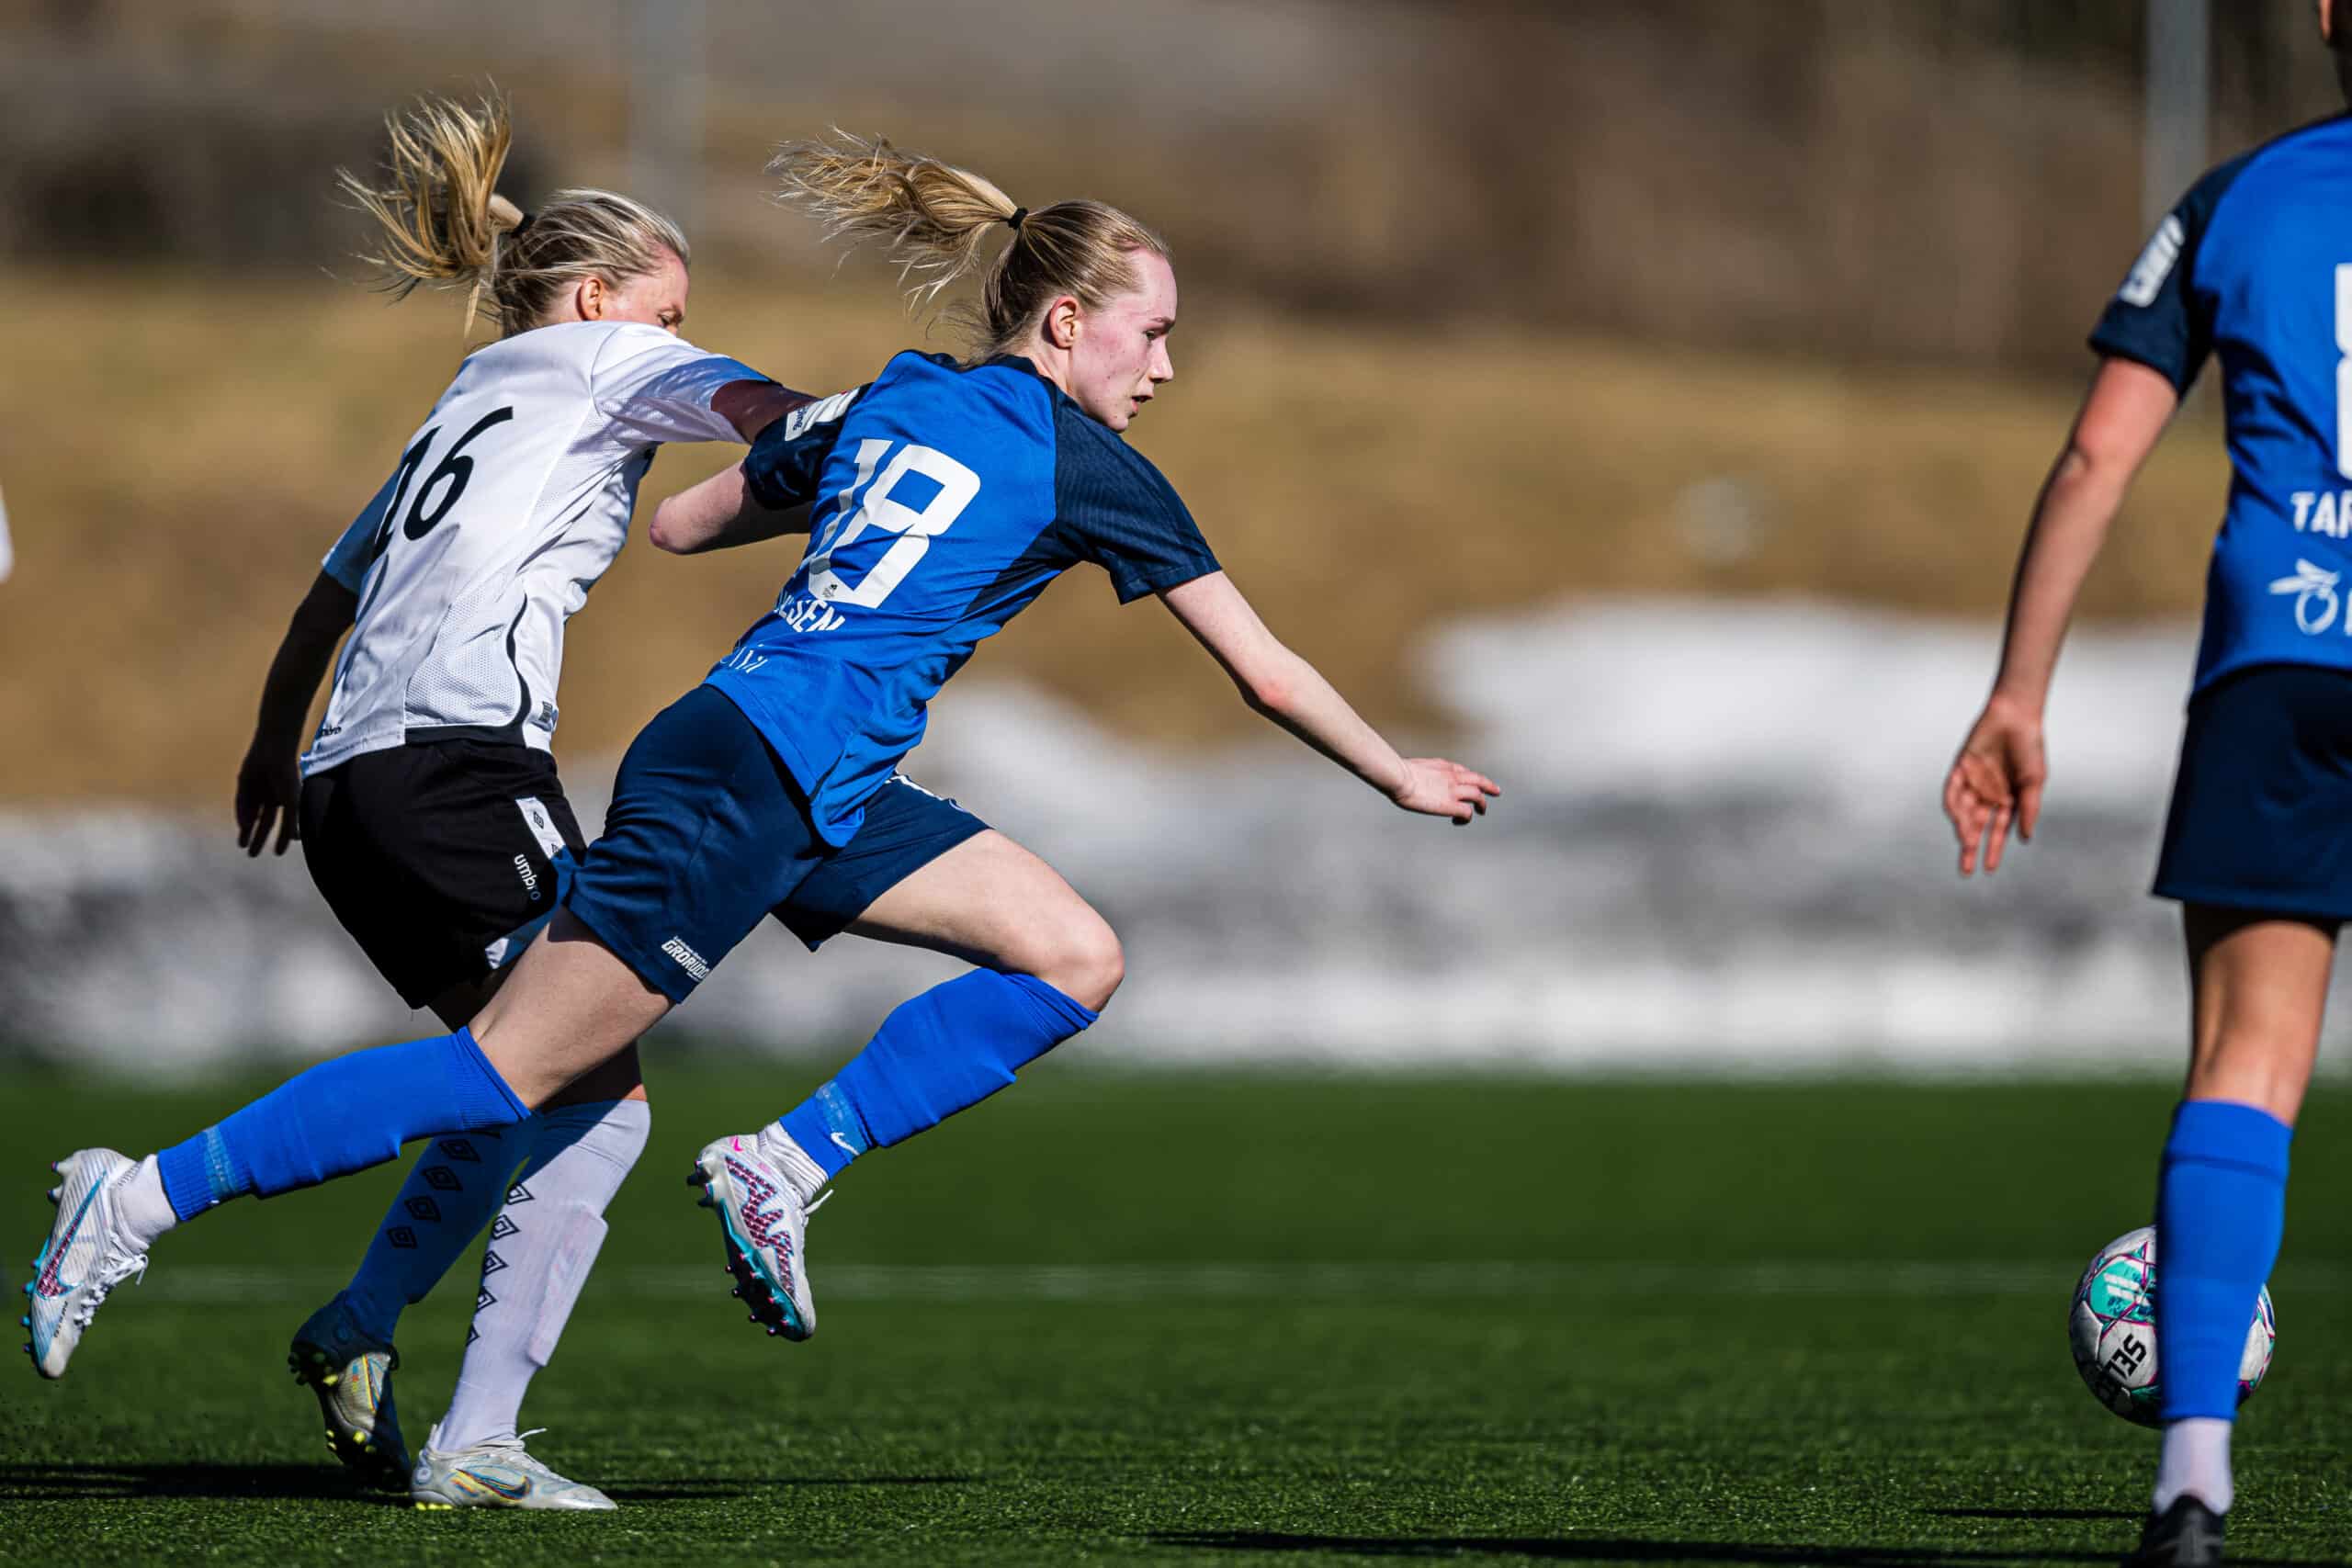 230422 Lina Osland Forthun of Fyllingsdalen and Thea Mikkelsen of Grei during the 1. division football match between Grei and Fyllingsdalen on April 22, 2023 in Oslo.
Photo: Marius Simensen / BILDBYRÅN / Cop 238